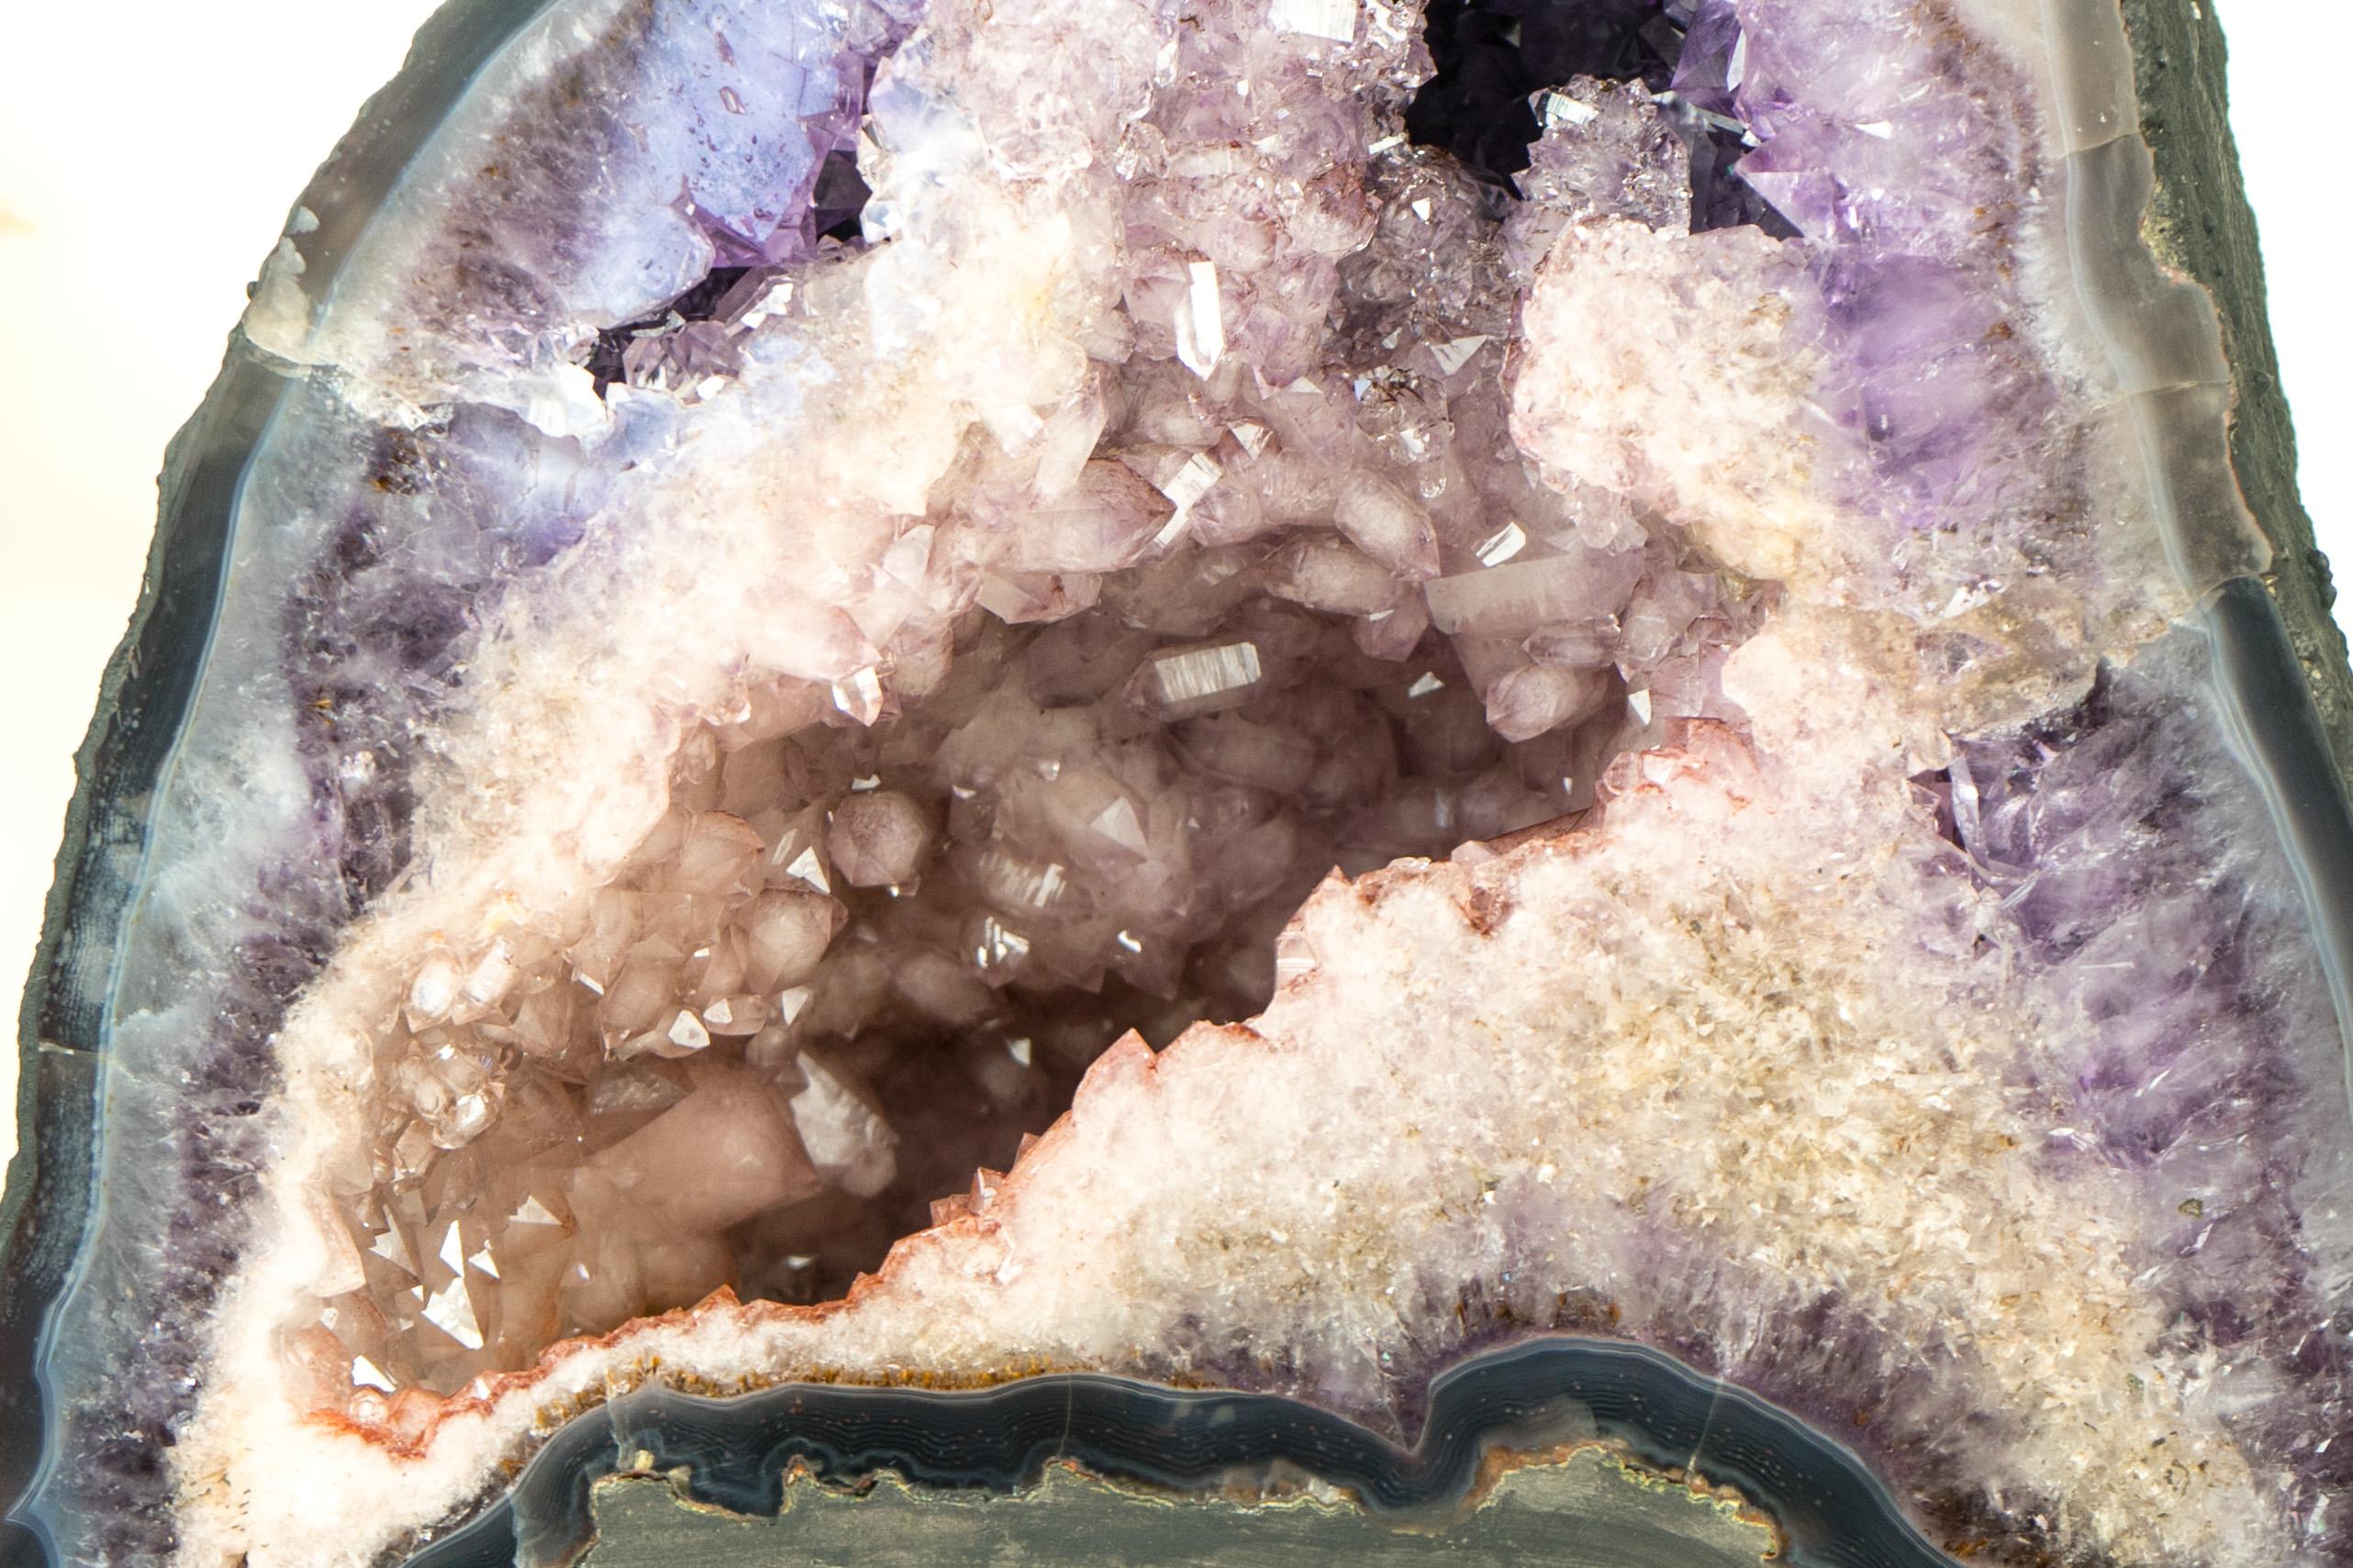 The fabulous specimen you are looking at is a Super Rare Amethyst Geode with half composed by Pink Quartz Druzy and half by Deep Purple Amethyst. A natural wonder to elevate any crystal collection or home decor, and will surely spark discussion